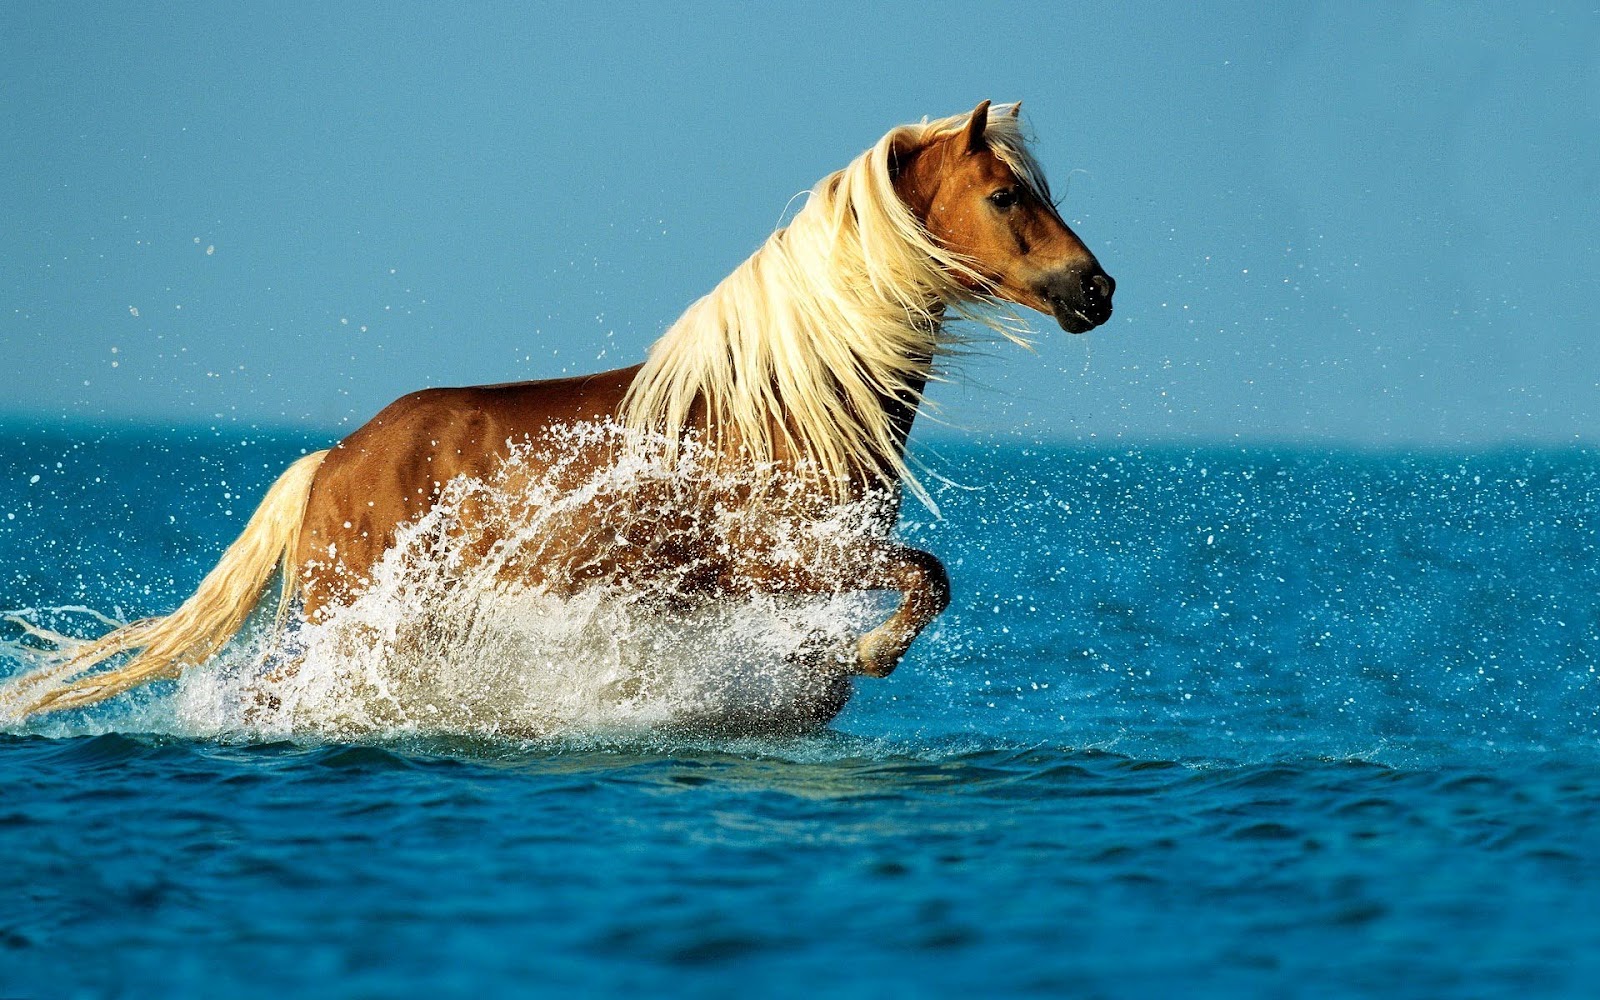 HD Animal Wallpaper With A Brown Horse Running Through The Sea